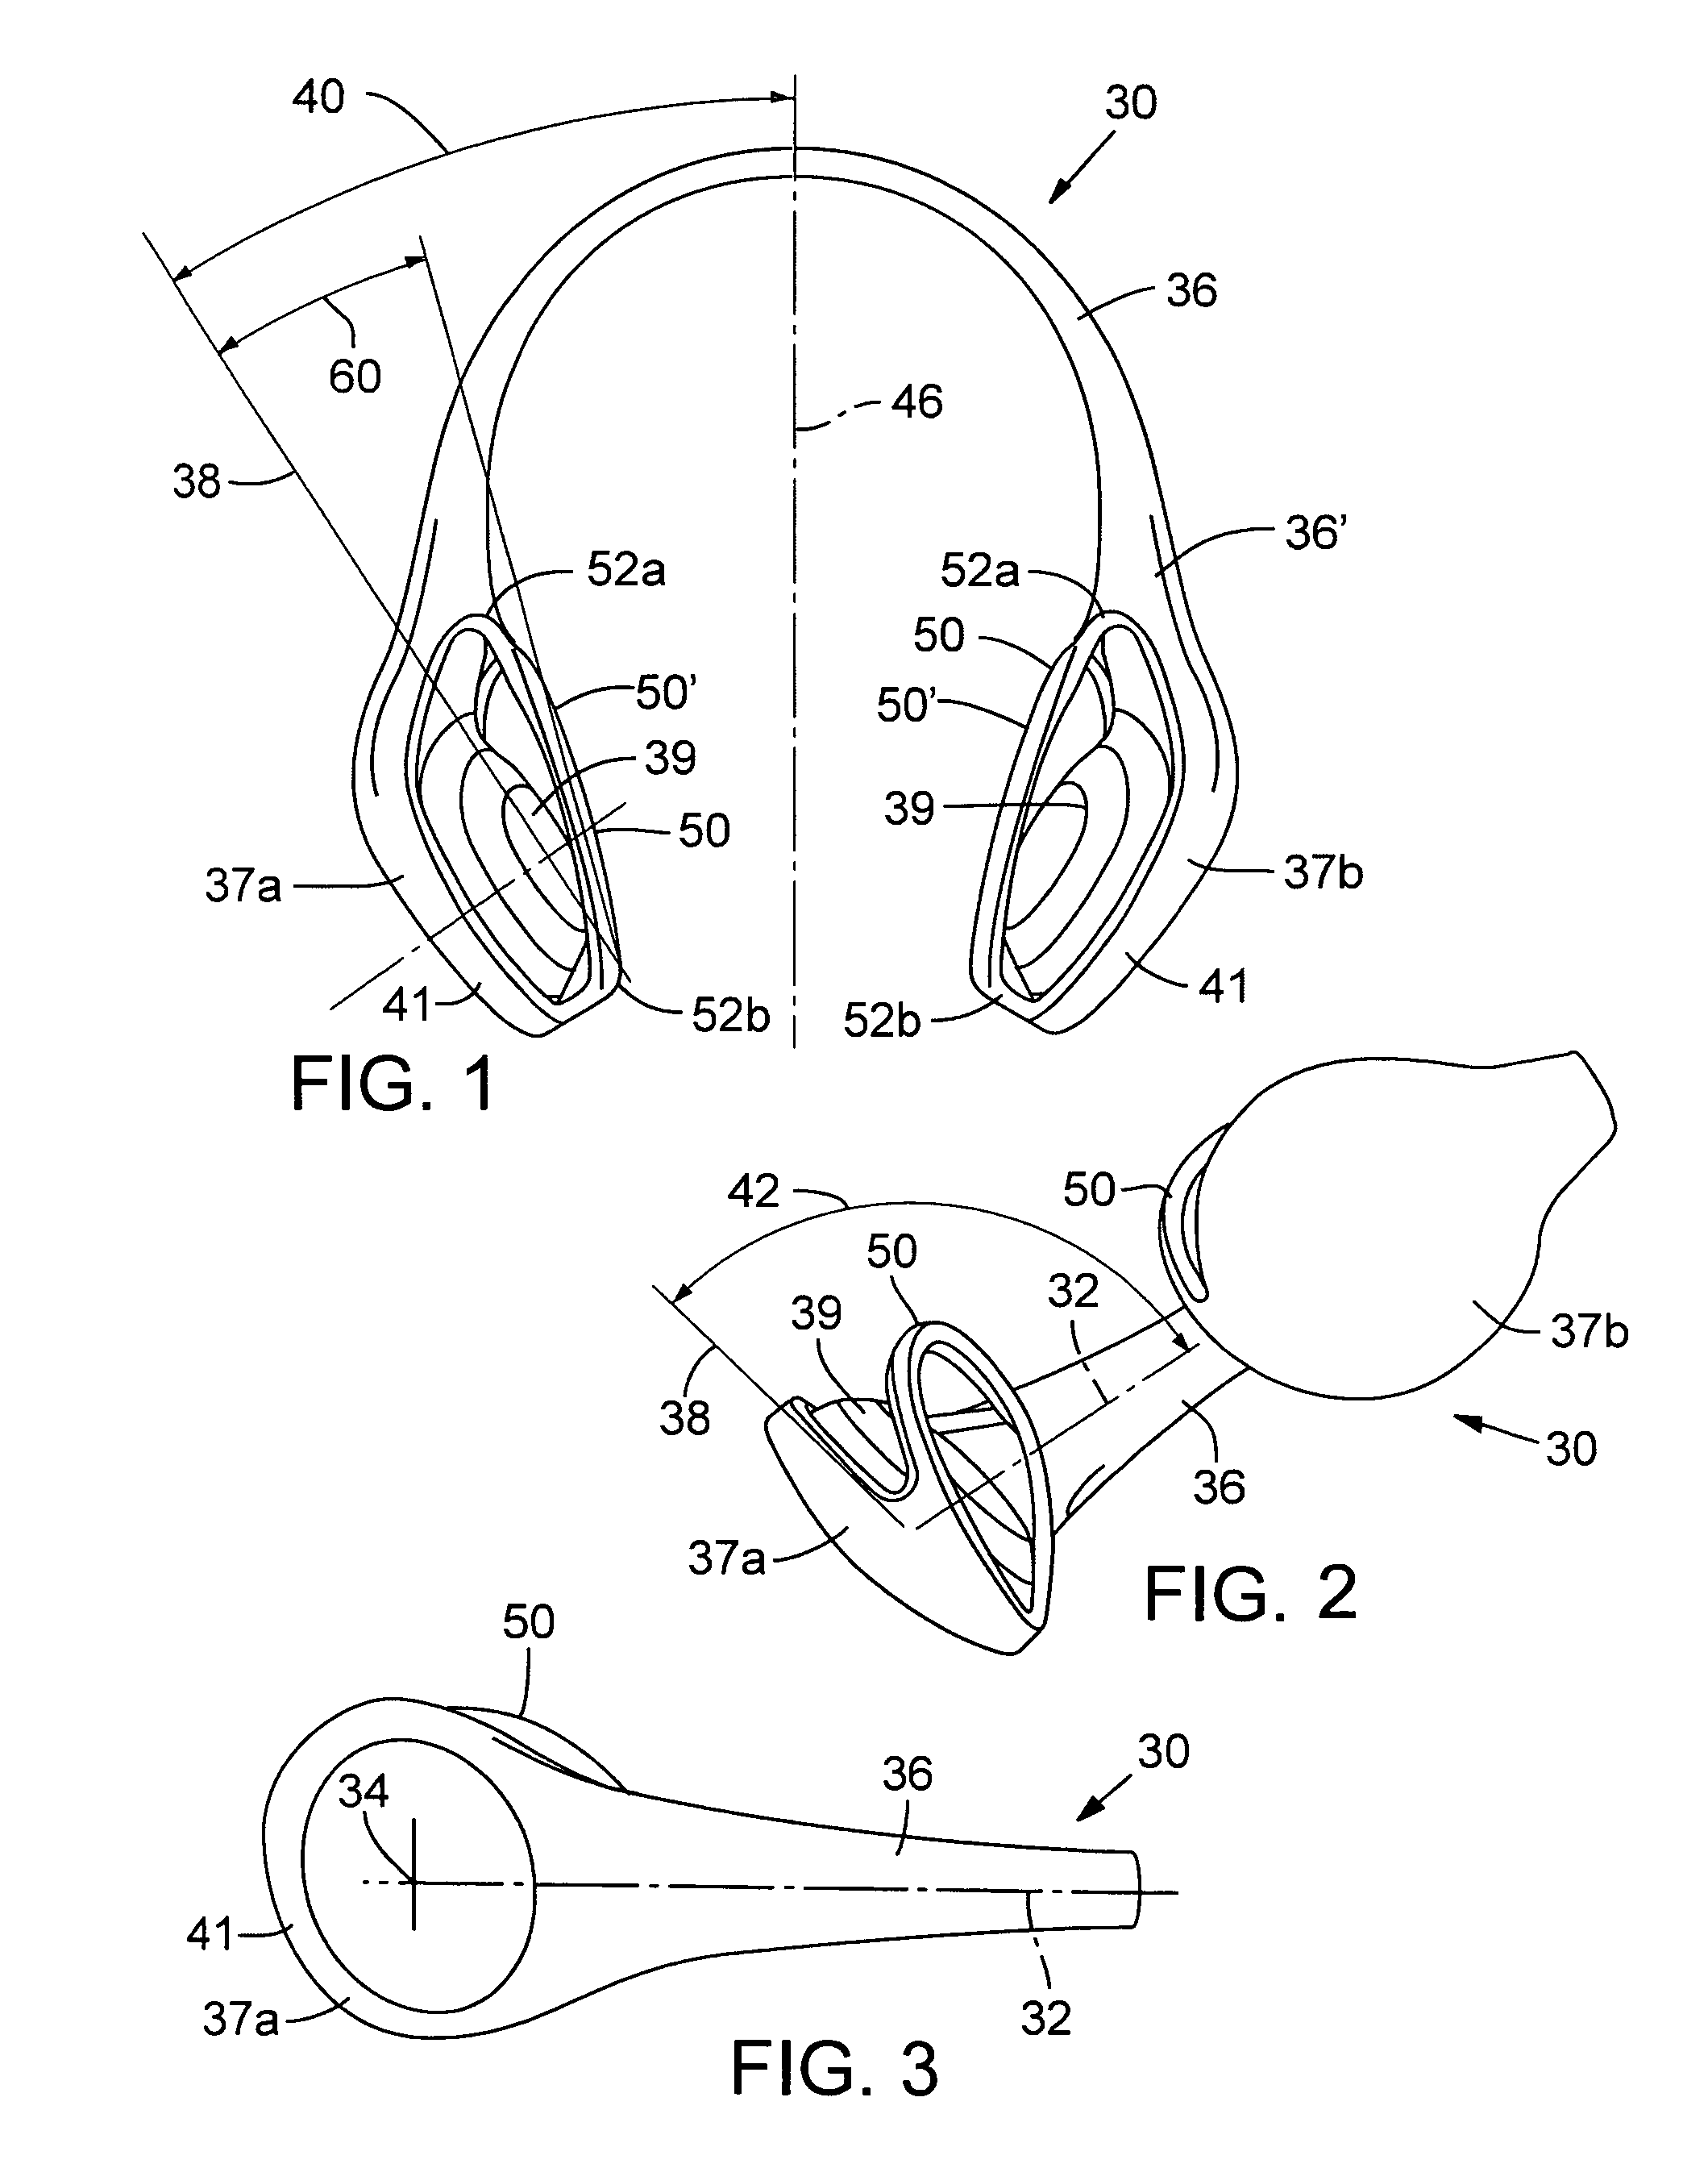 Ergonomic behind-the-head personal audio set and method of manufacturing same